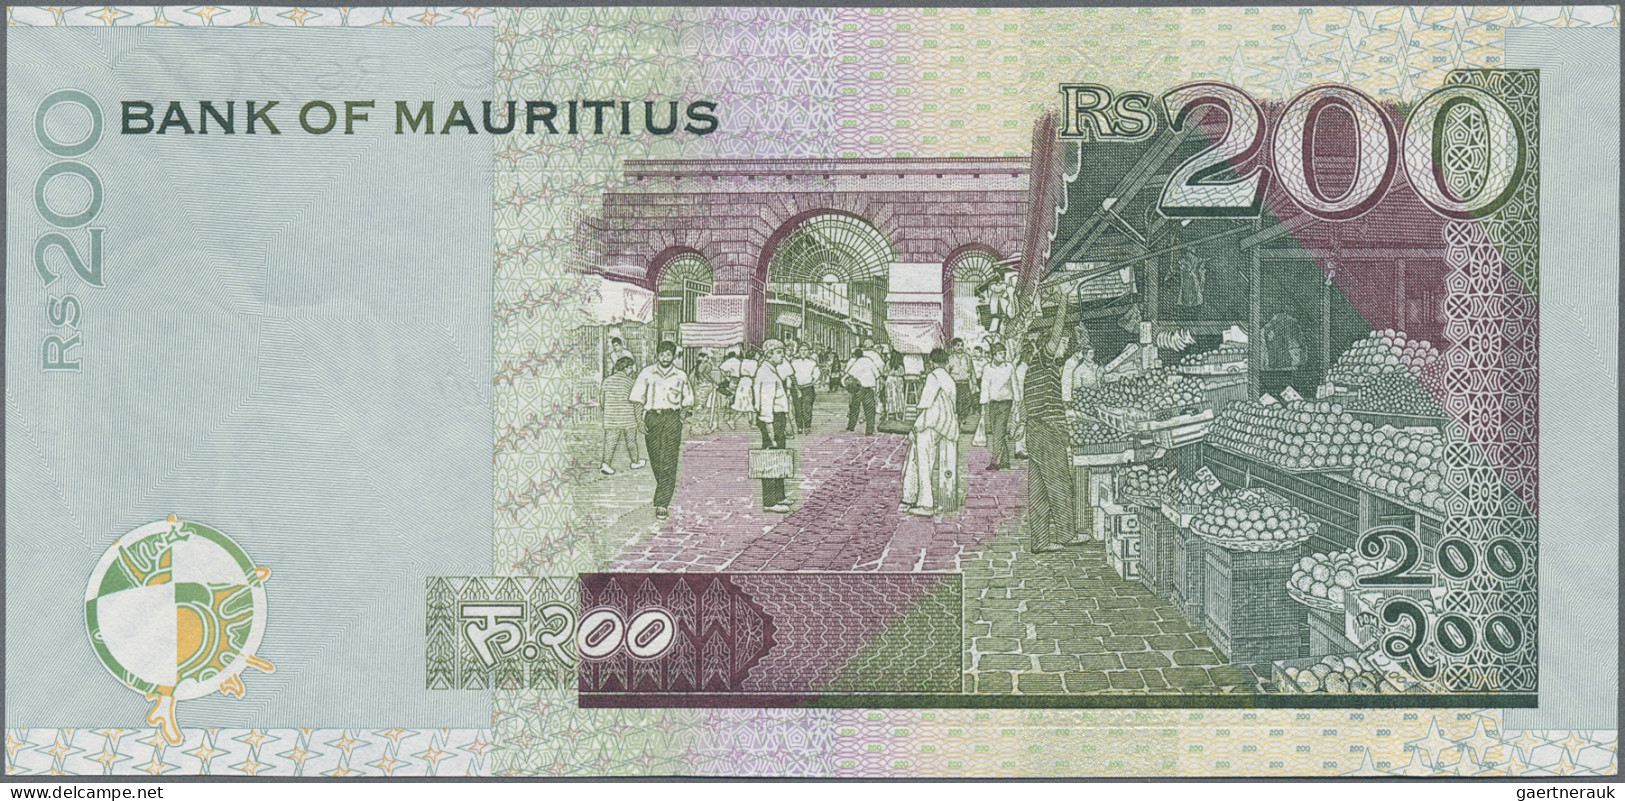 Mauritius: Bank Of Mauritius, Lot With 5 Banknotes, 2001 And 2007 Series, With 1 - Maurice